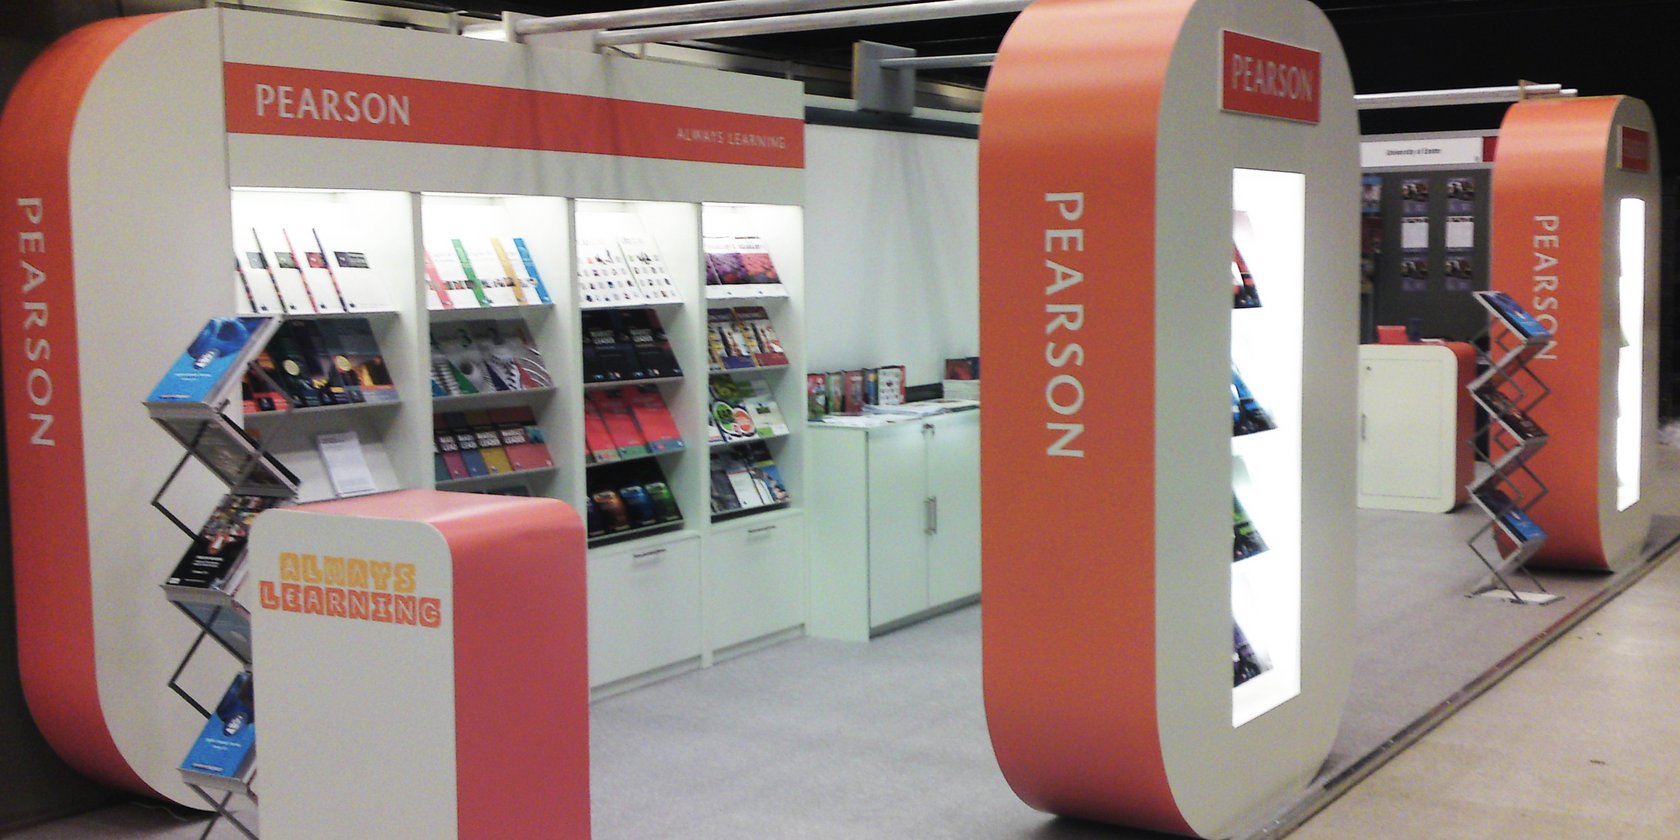 Custom Built Exhibition Stand for Pearson